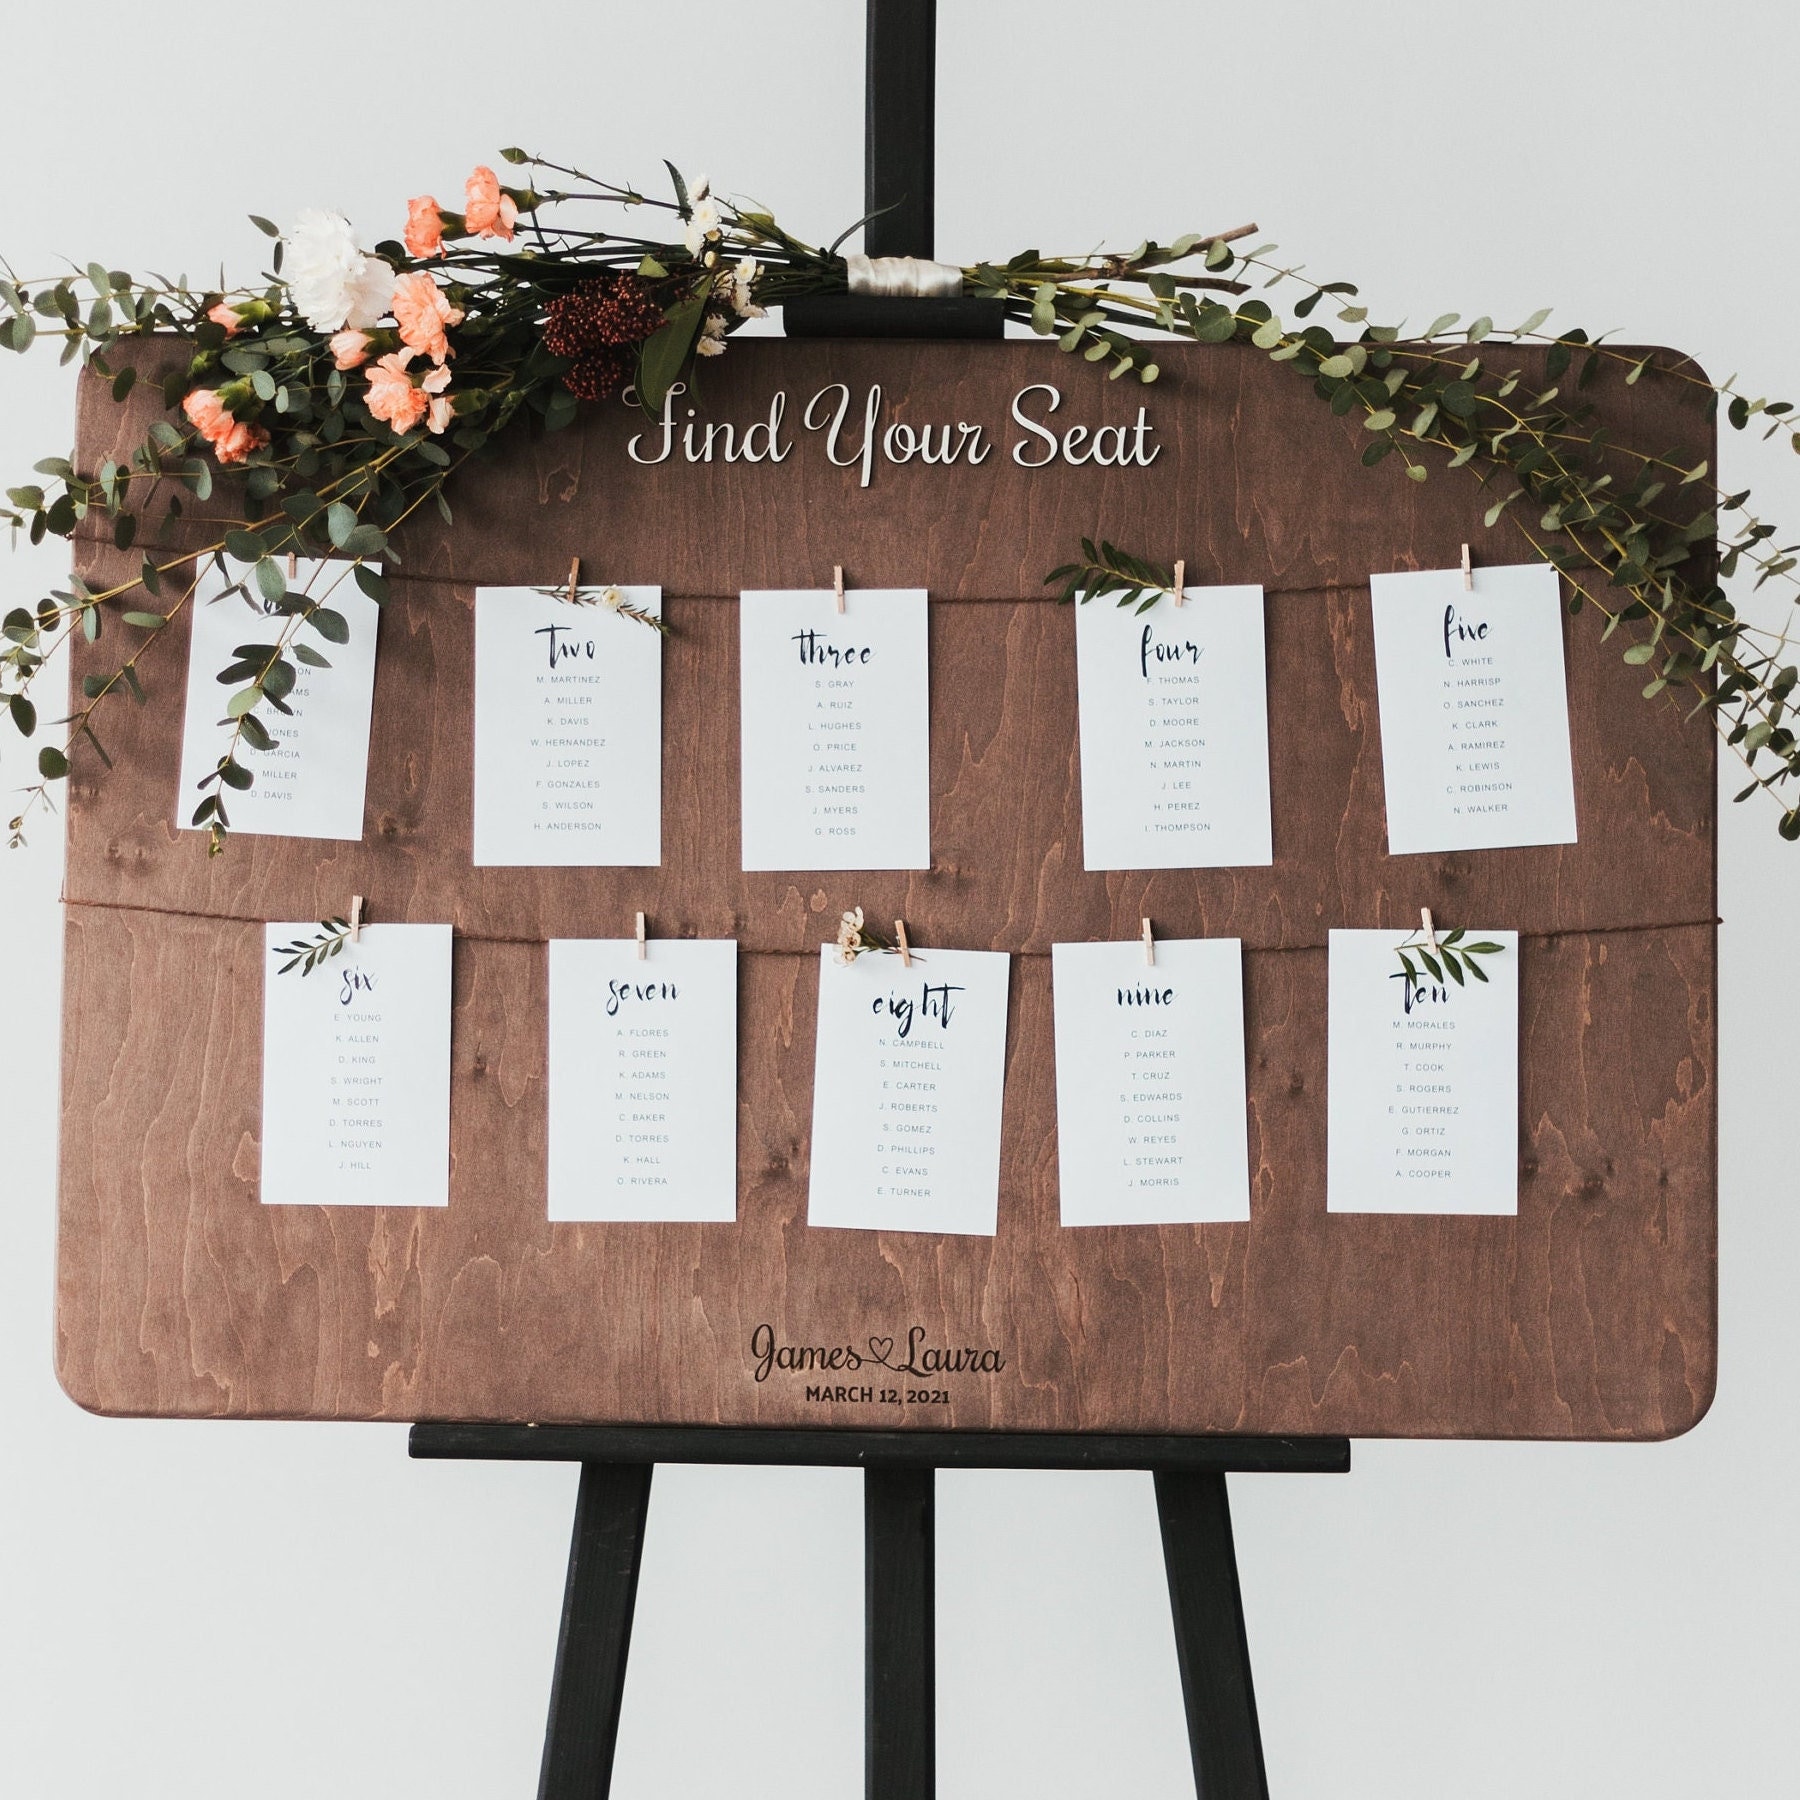 Find your seat rustic sign. Rustic find your seat sign. Wedding table –  Bridges2You